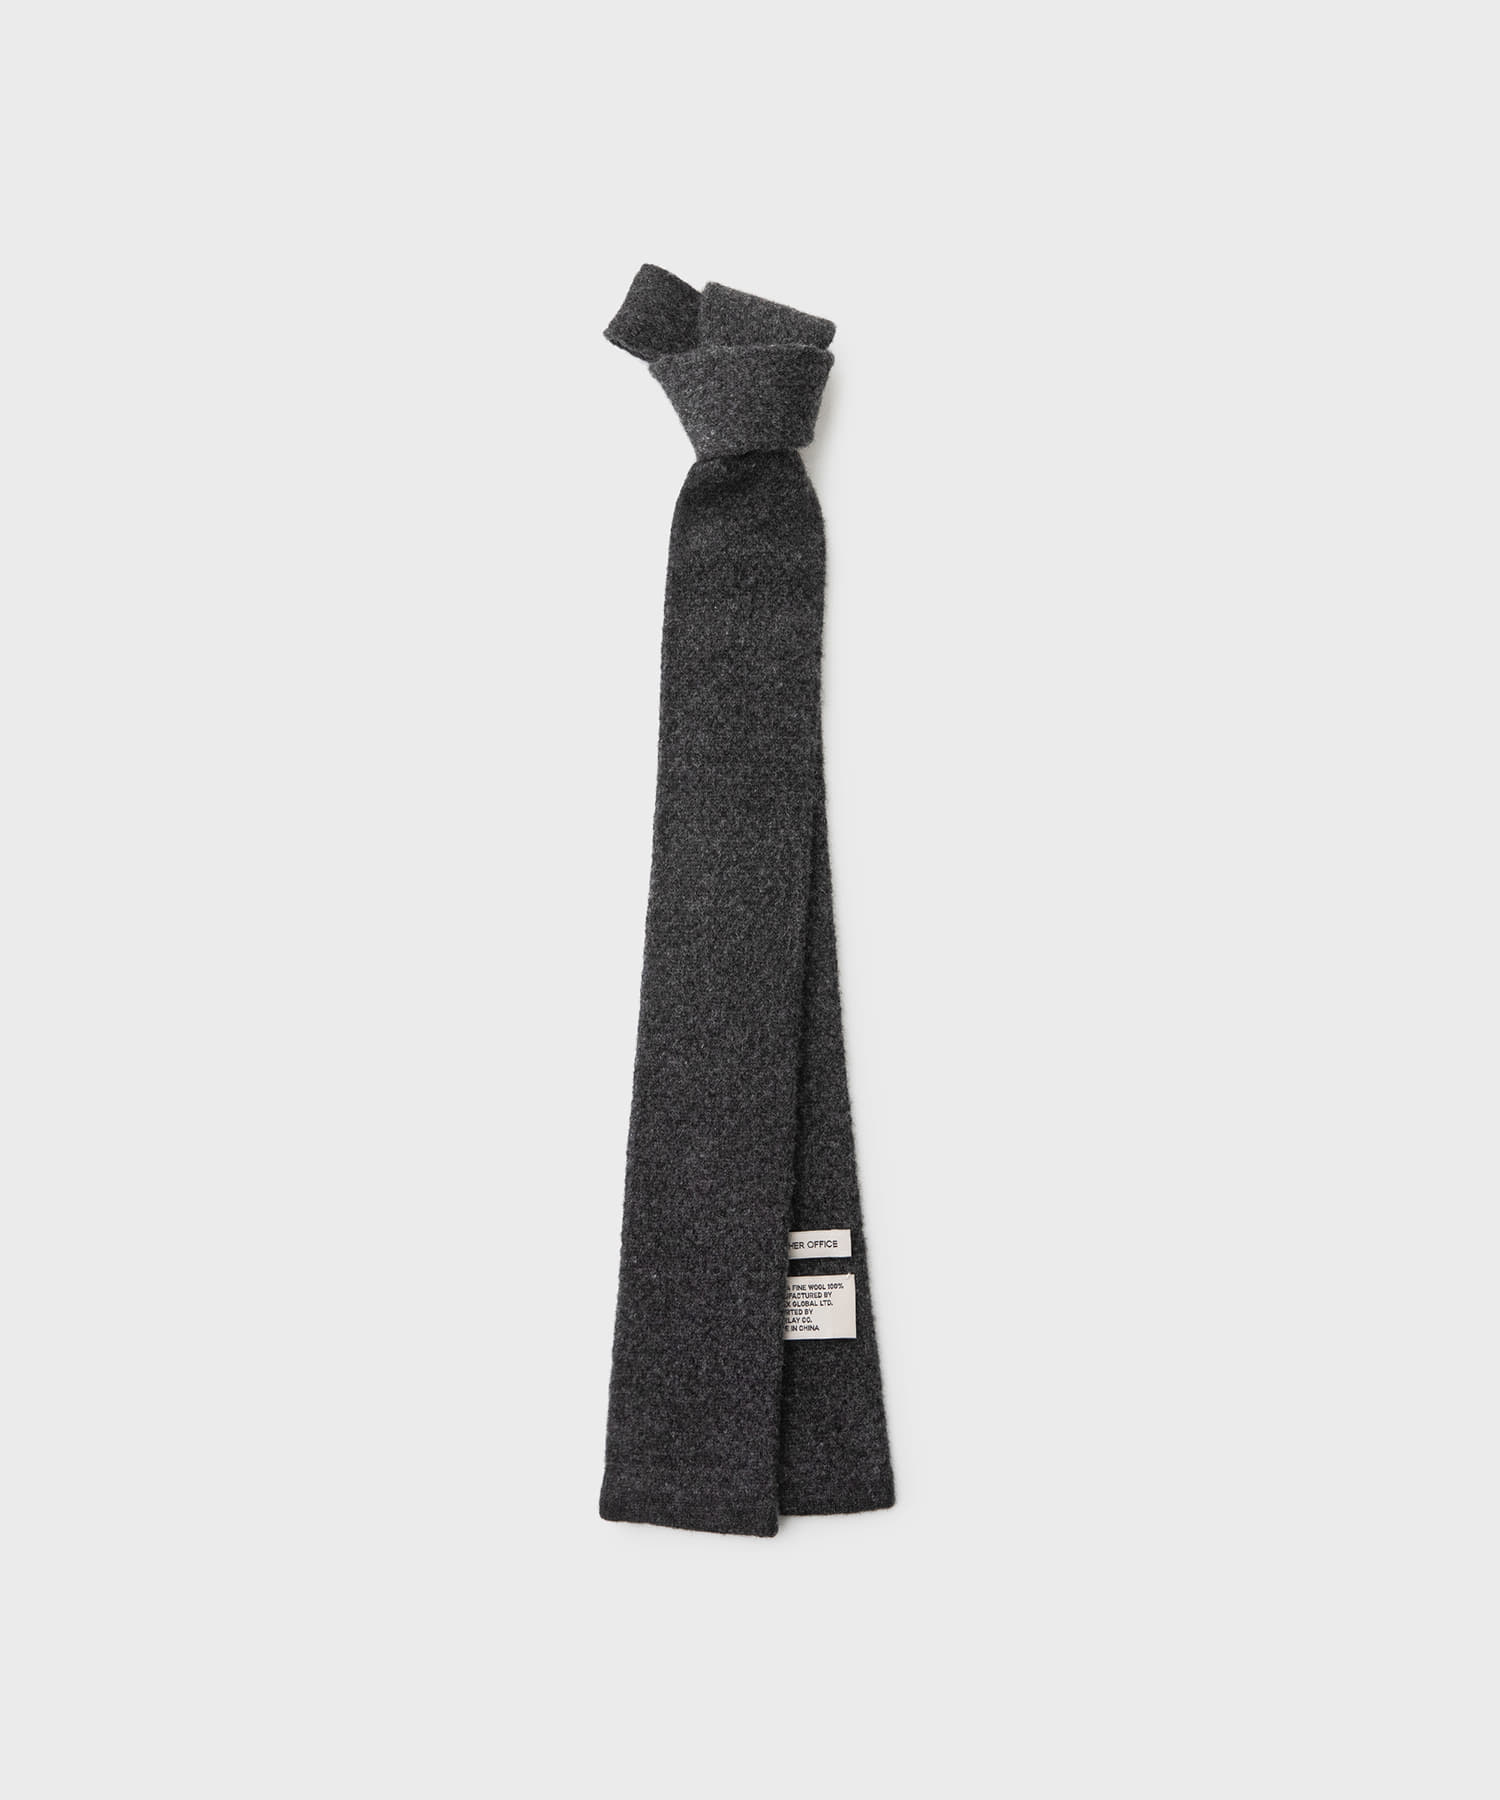 CRAFT KNIT-TIE (Charcoal)